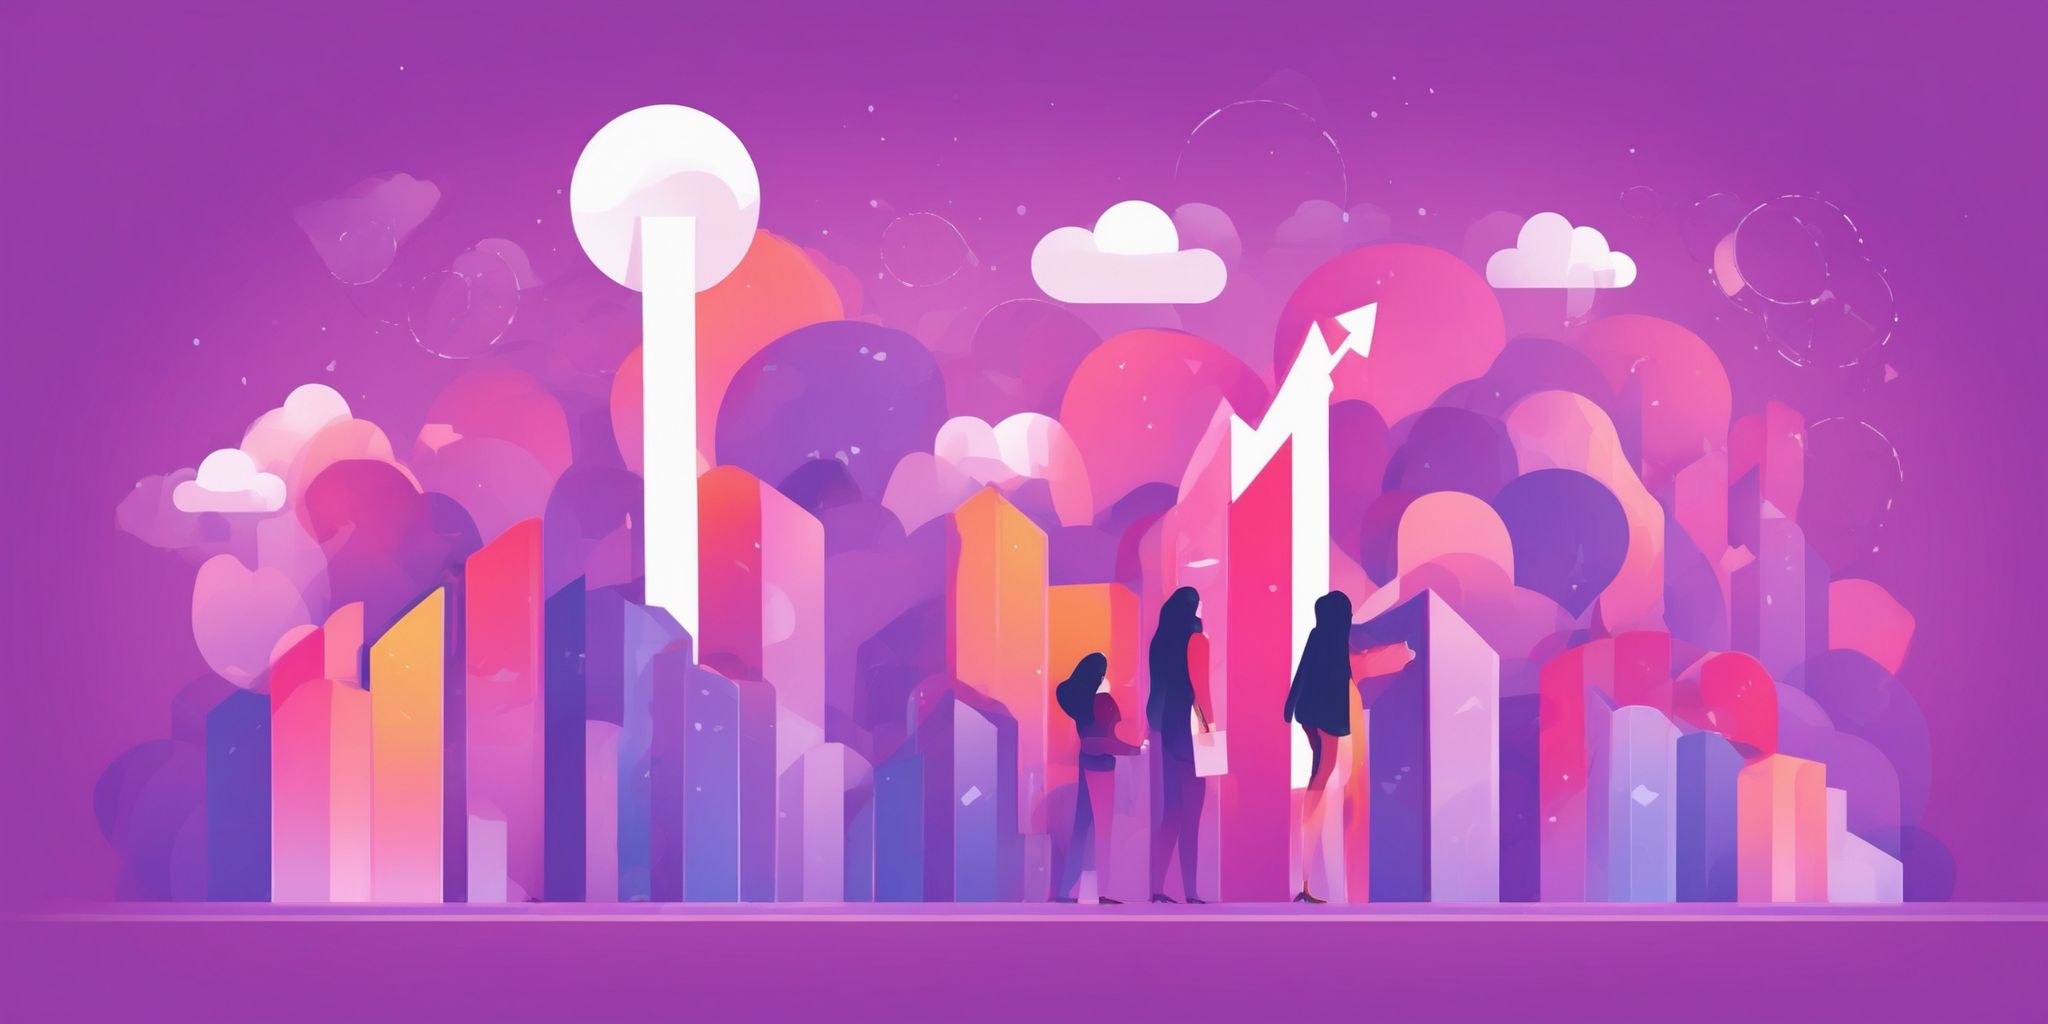 Keyword: SEO growth in flat illustration style, colorful purple gradient colors